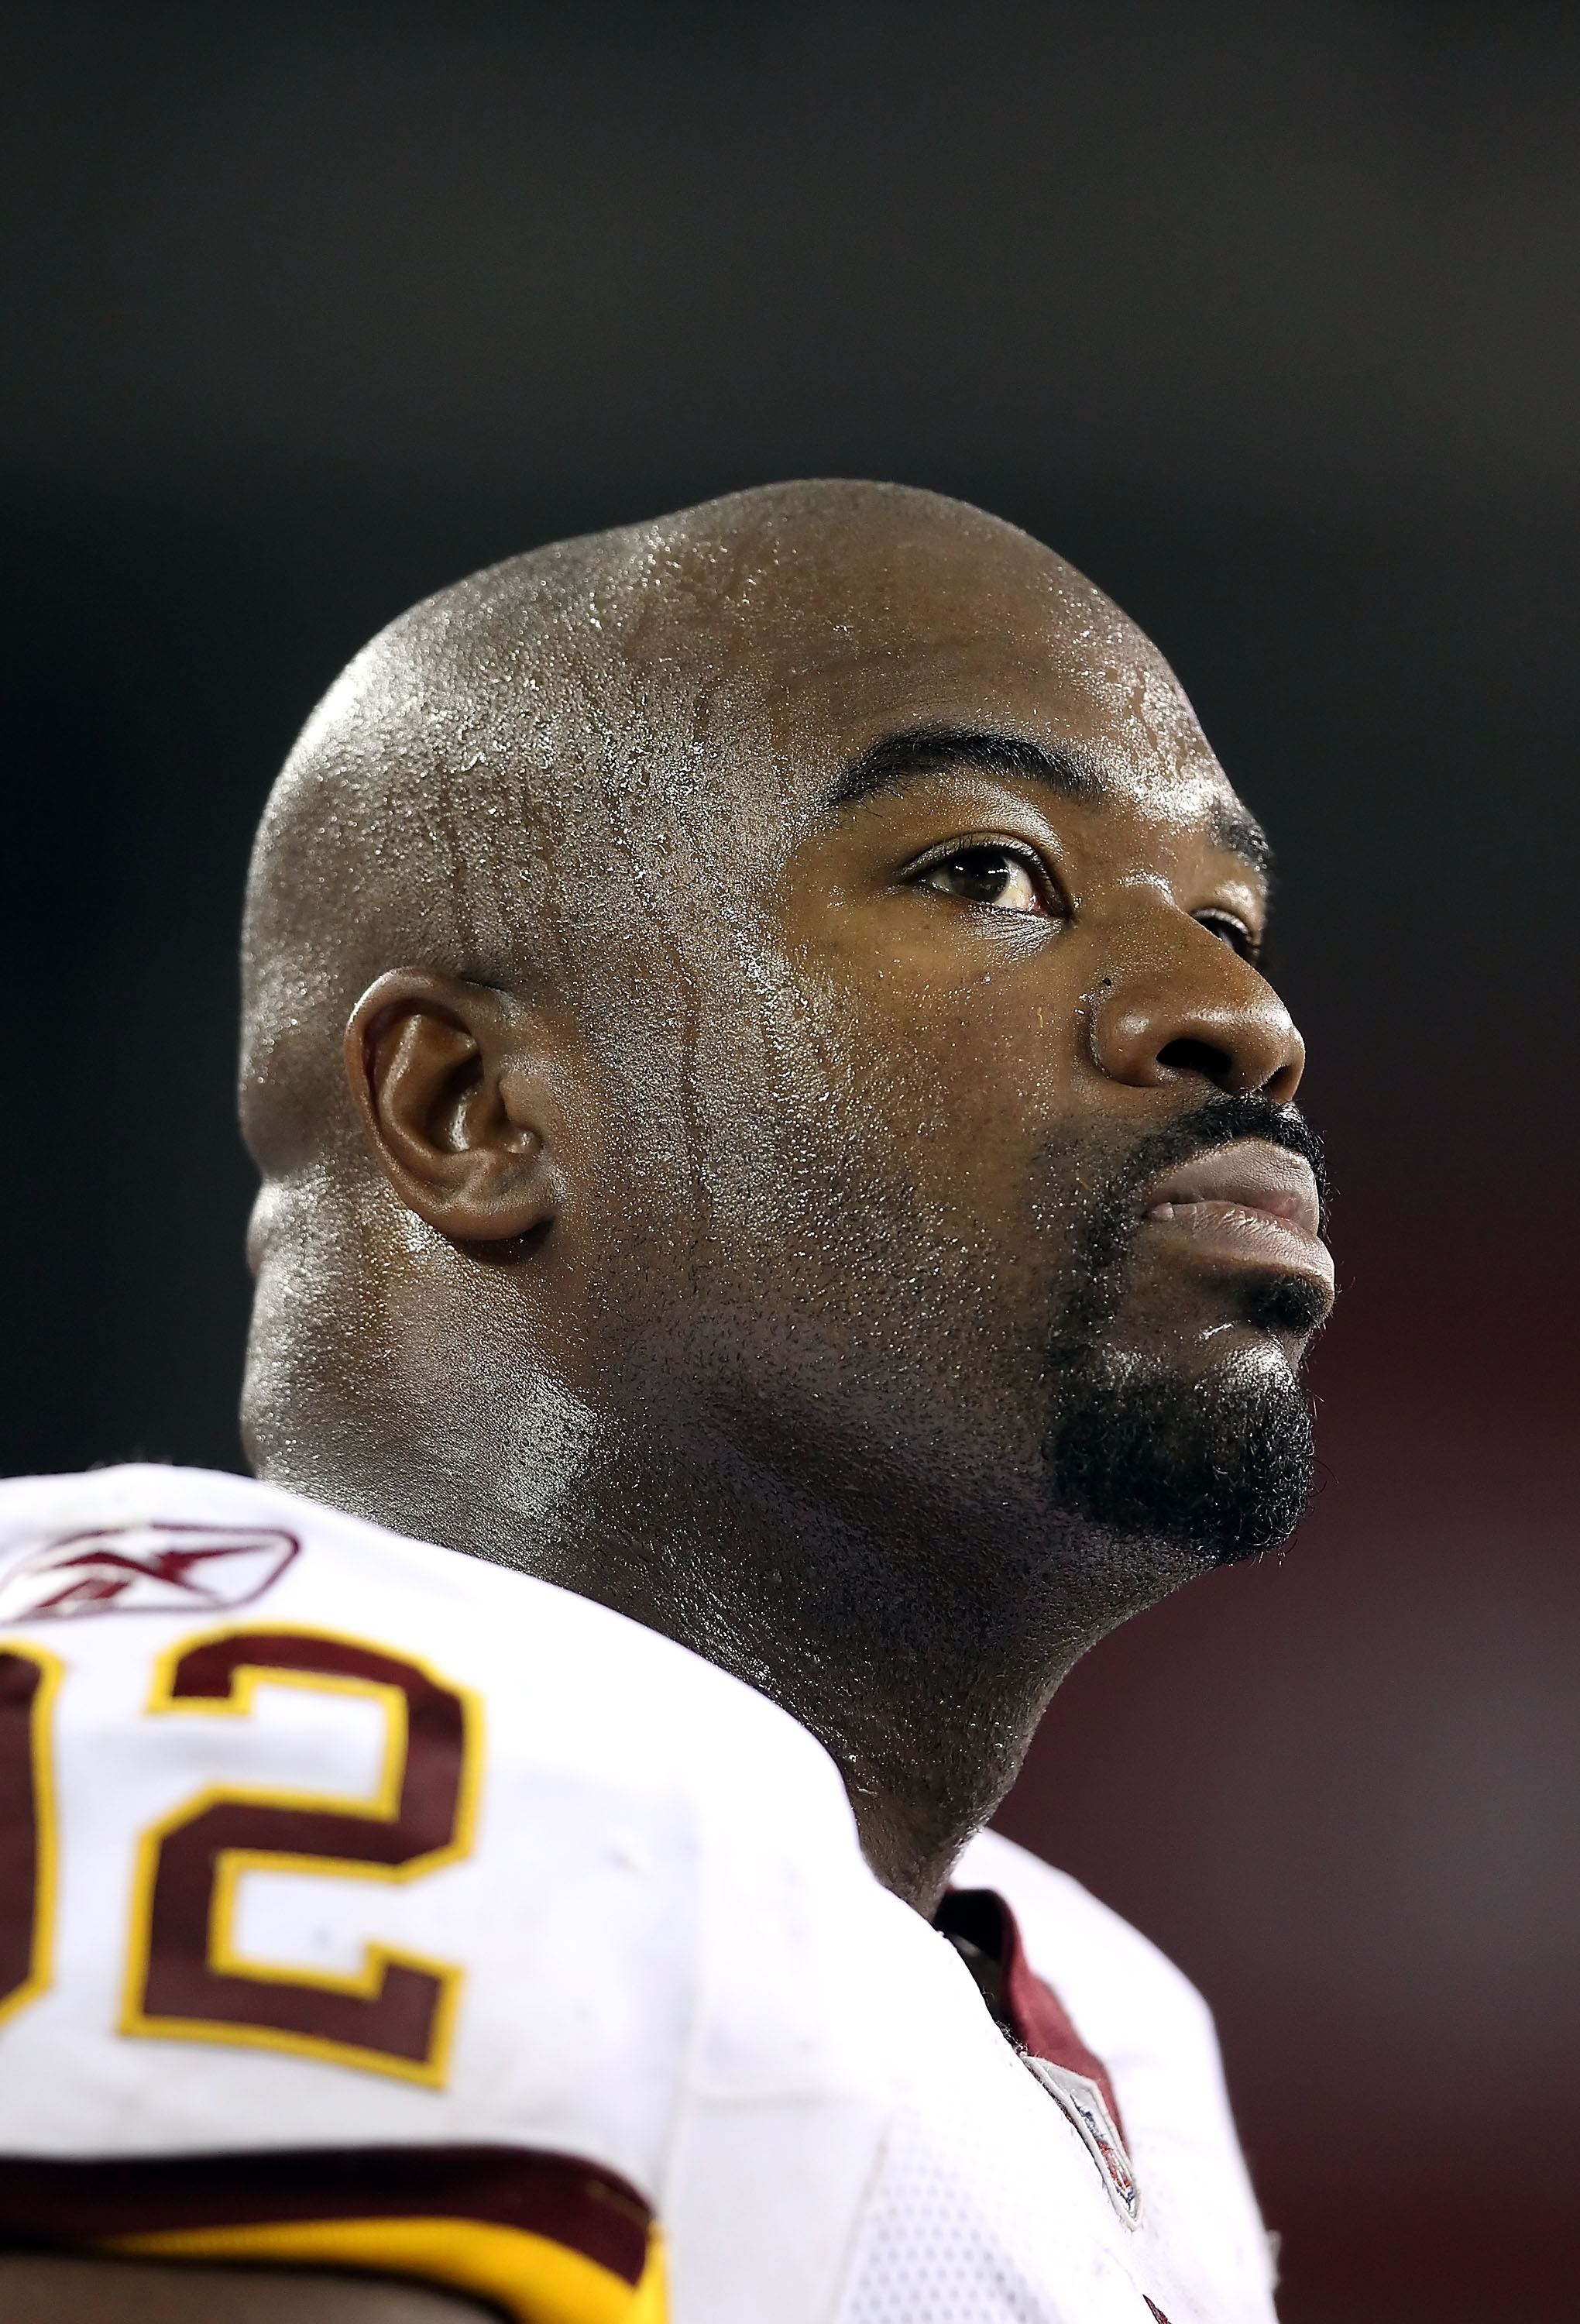 GLENDALE, AZ - SEPTEMBER 02:  Defensive tackle Albert Haynesworth #92 of the Washington Redskins stands on the sidelines during preseason NFL game against the Arizona Cardinals at the University of Phoenix Stadium on September 2, 2010 in Glendale, Arizona